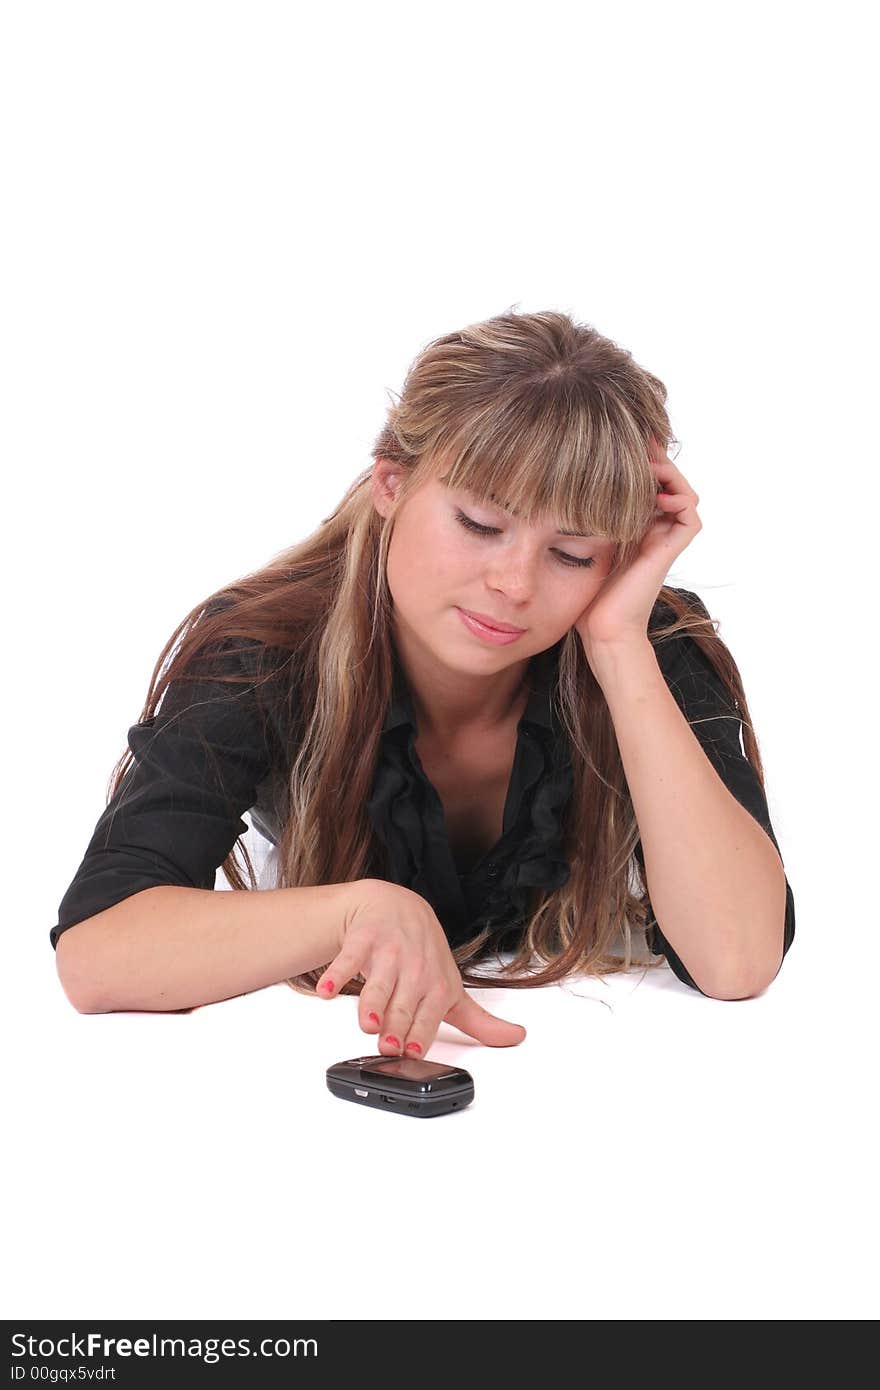 A dissatisfied woman laying with a phone in her hand on white background. A dissatisfied woman laying with a phone in her hand on white background